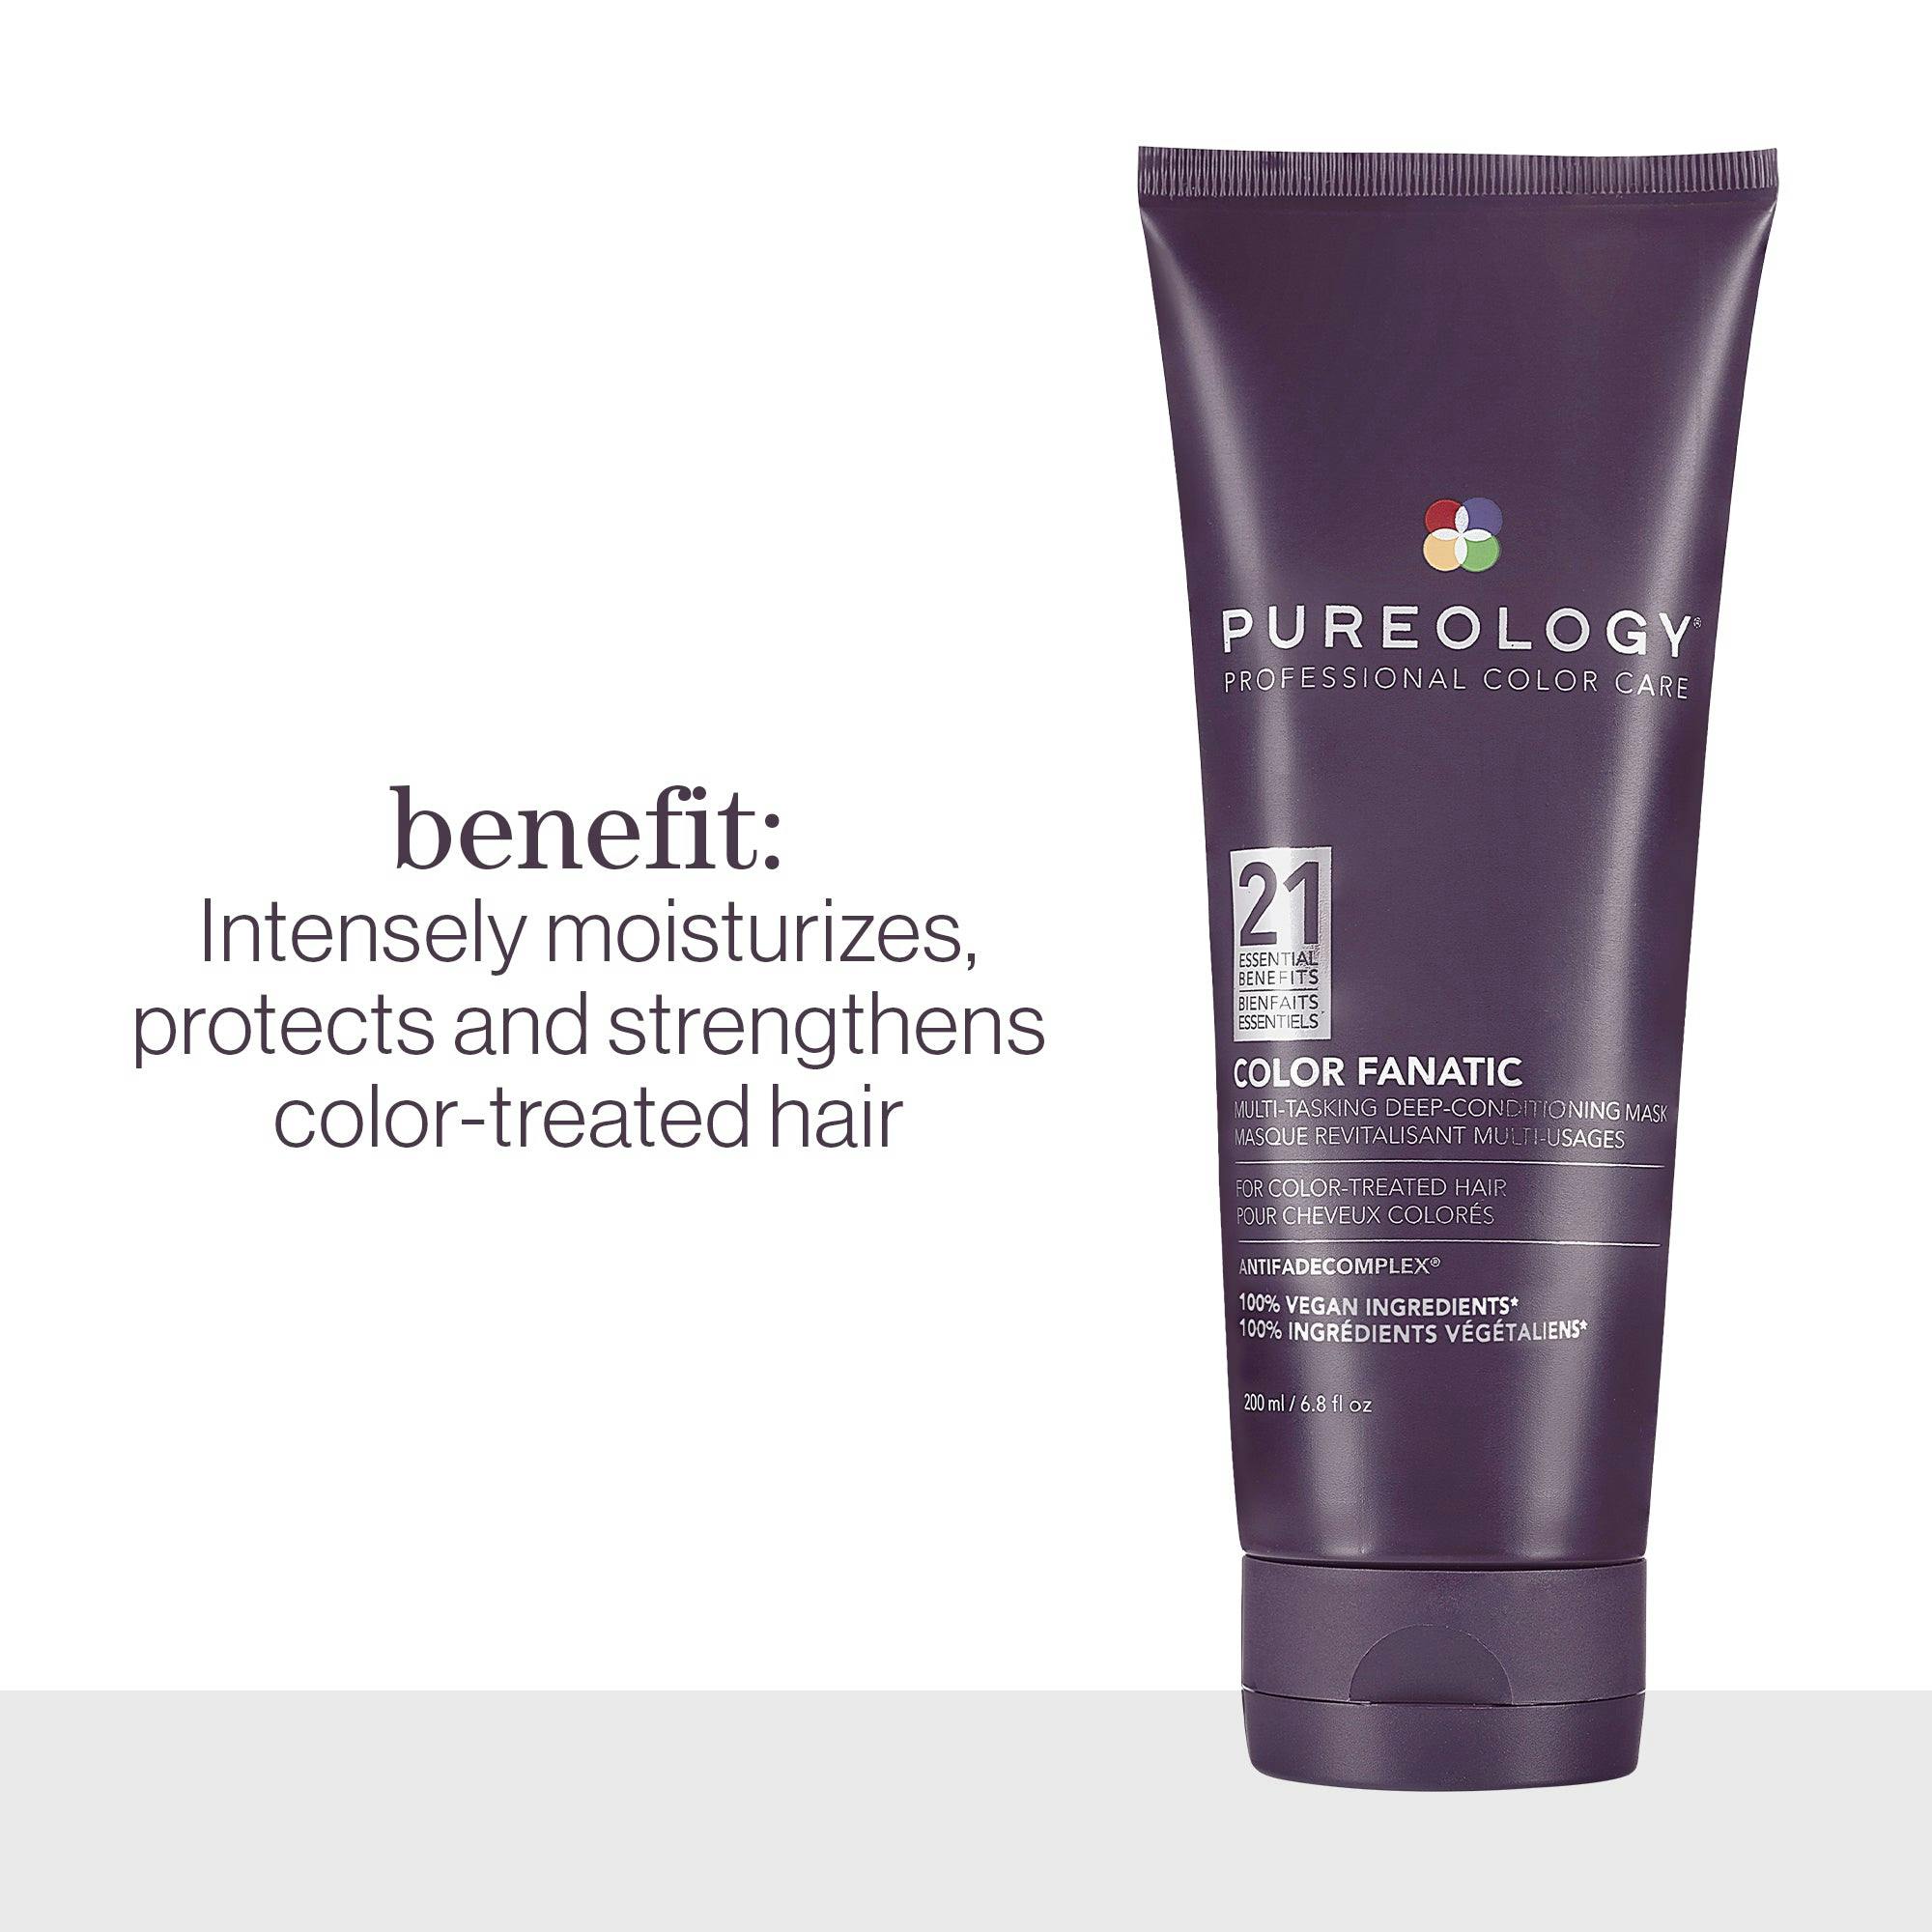 Pureology Colour Fanatic Multi-Tasking Deep-Conditioning Masque 200ml